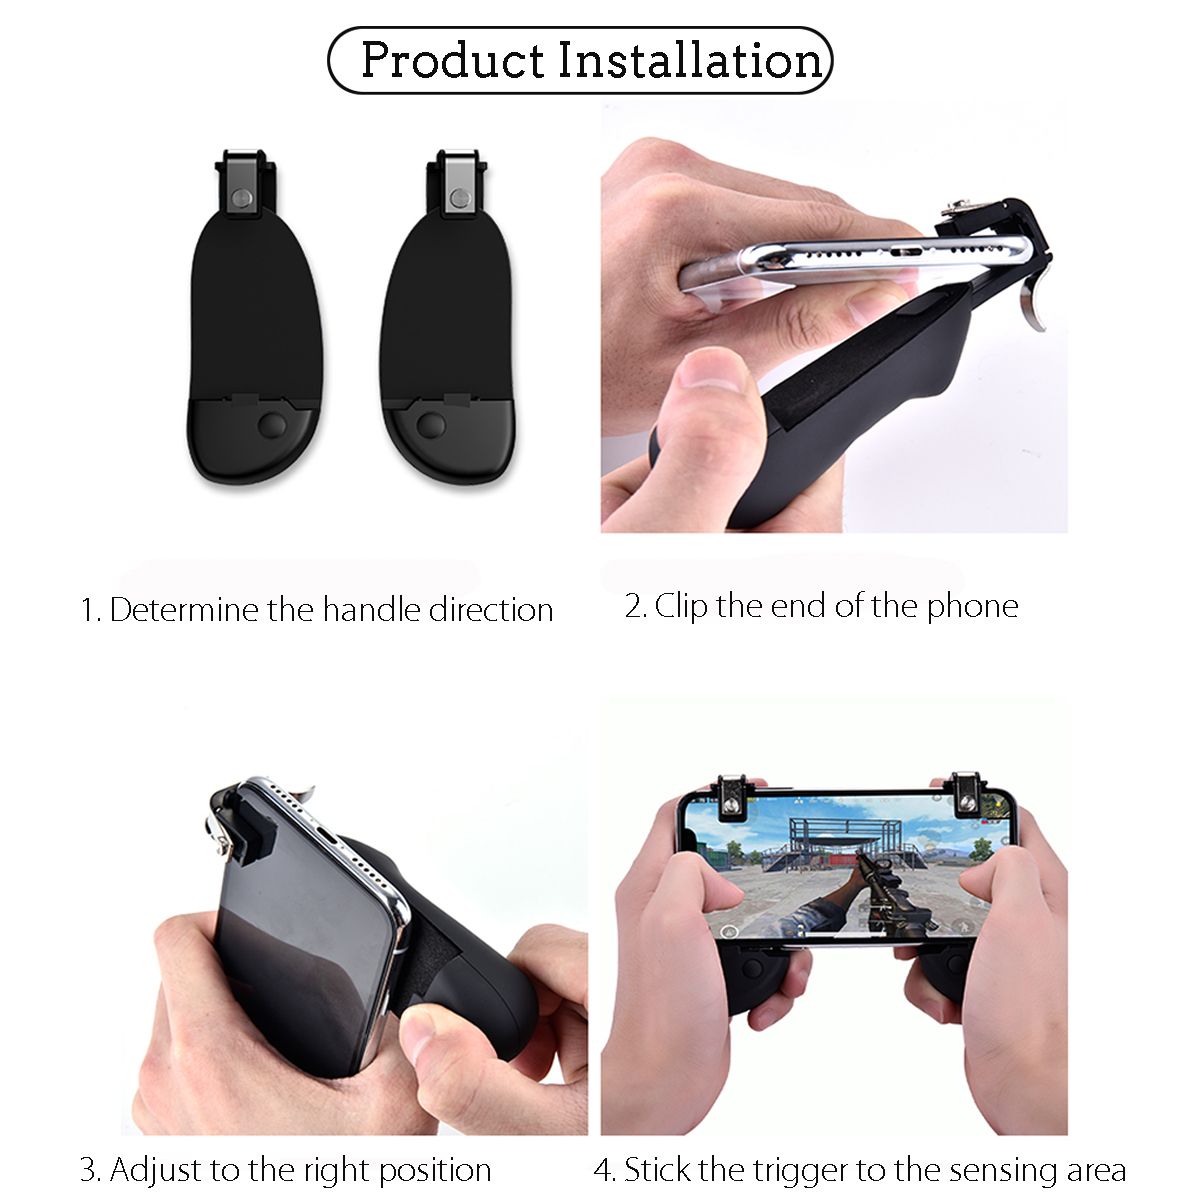 Mobile-Gaming-Gamepad-Joystick-Controller-Trigger-Fire-Button-For-Mobile-Phone-1369955